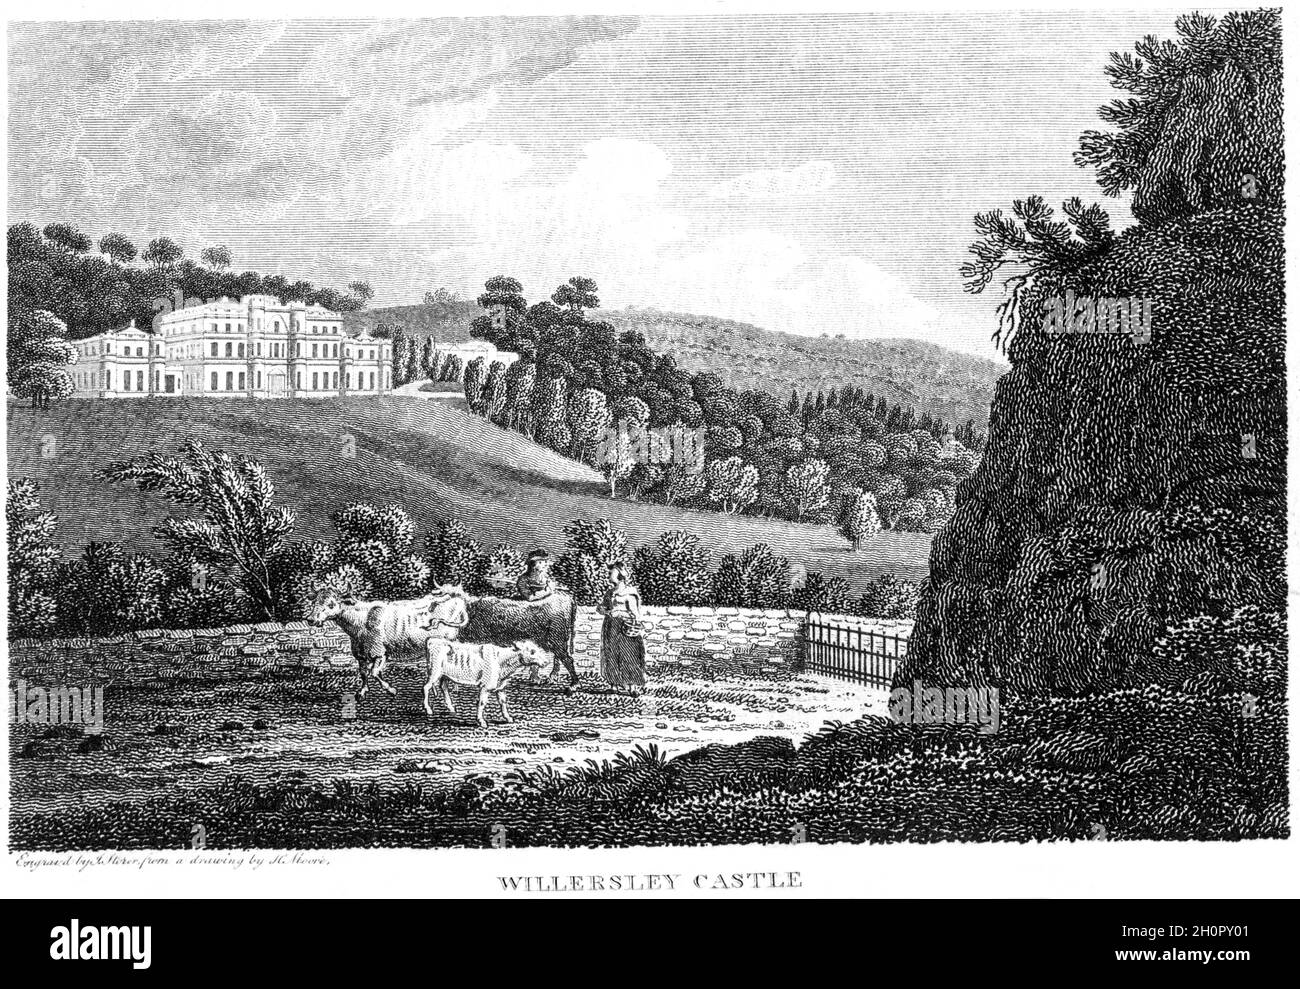 An engraving of Willersley Castle, Derbyshire UK scanned at high resolution from a book printed in 1812. Believed copyright free. Stock Photo